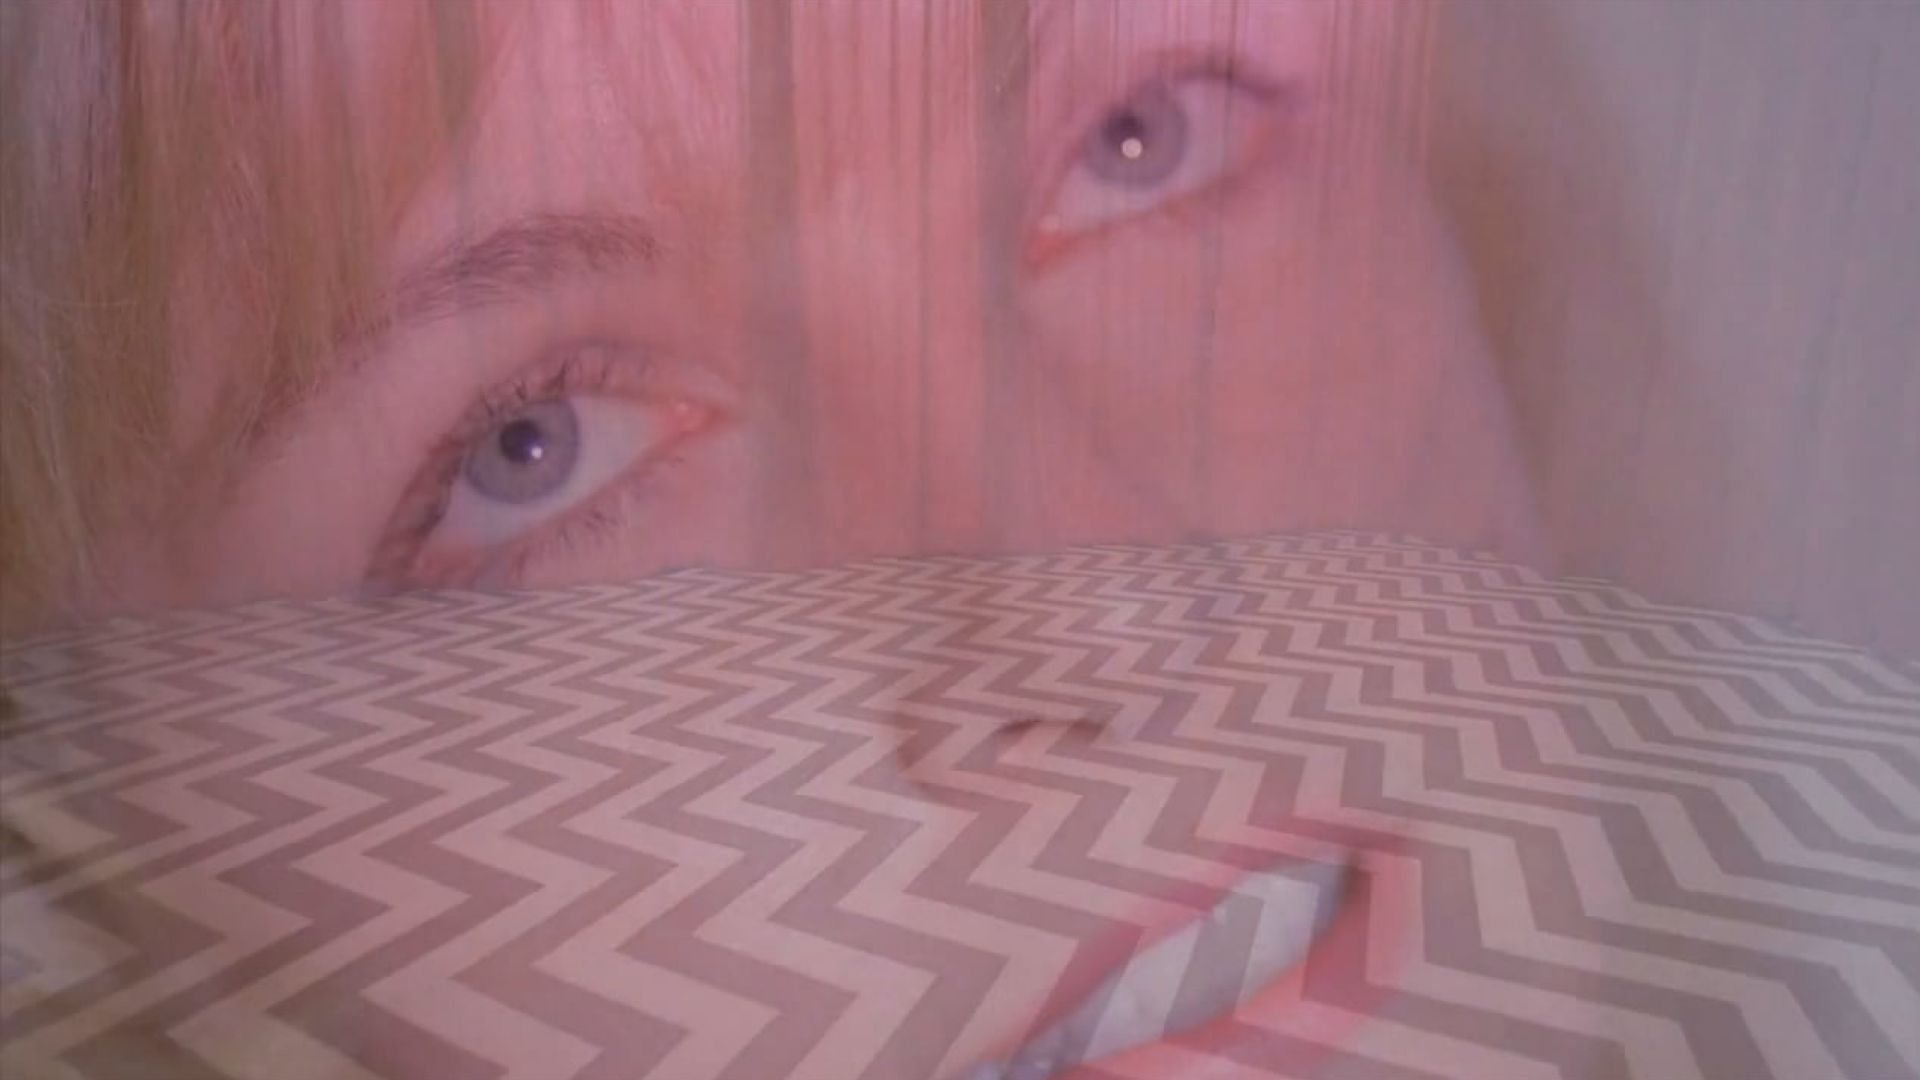 Watch cool tribute montage to the films of David Lynch